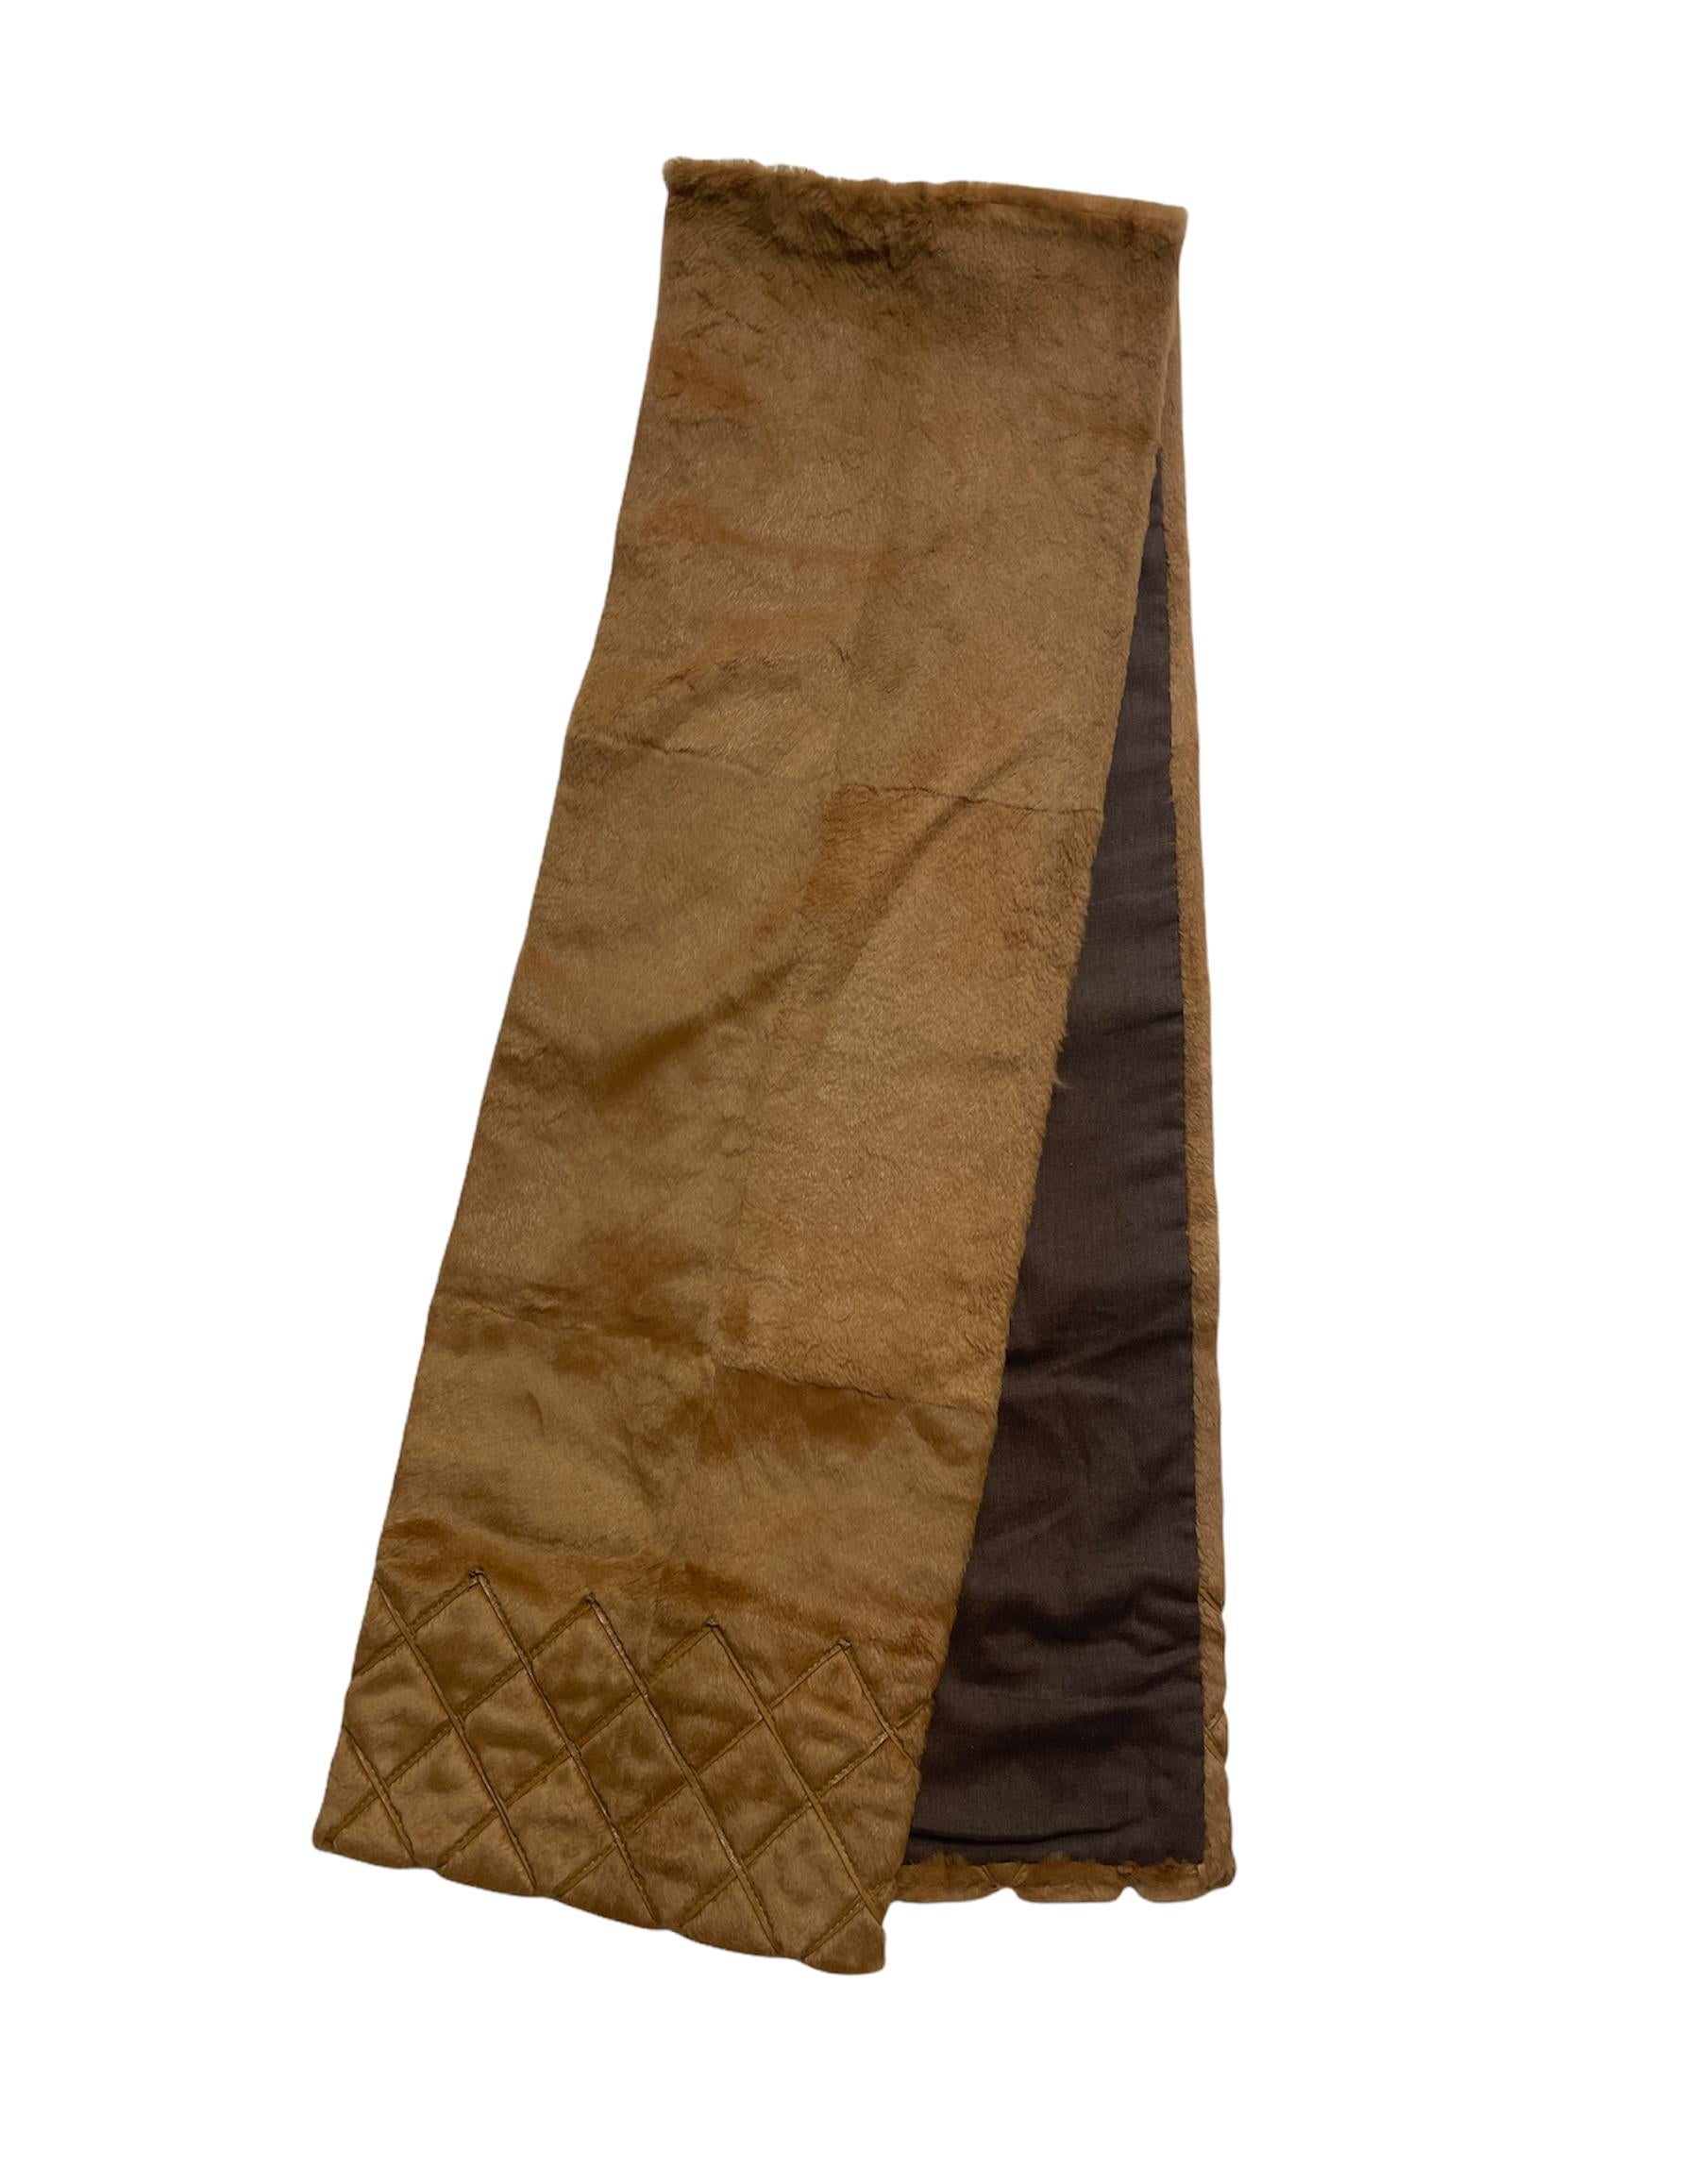 a leather stole